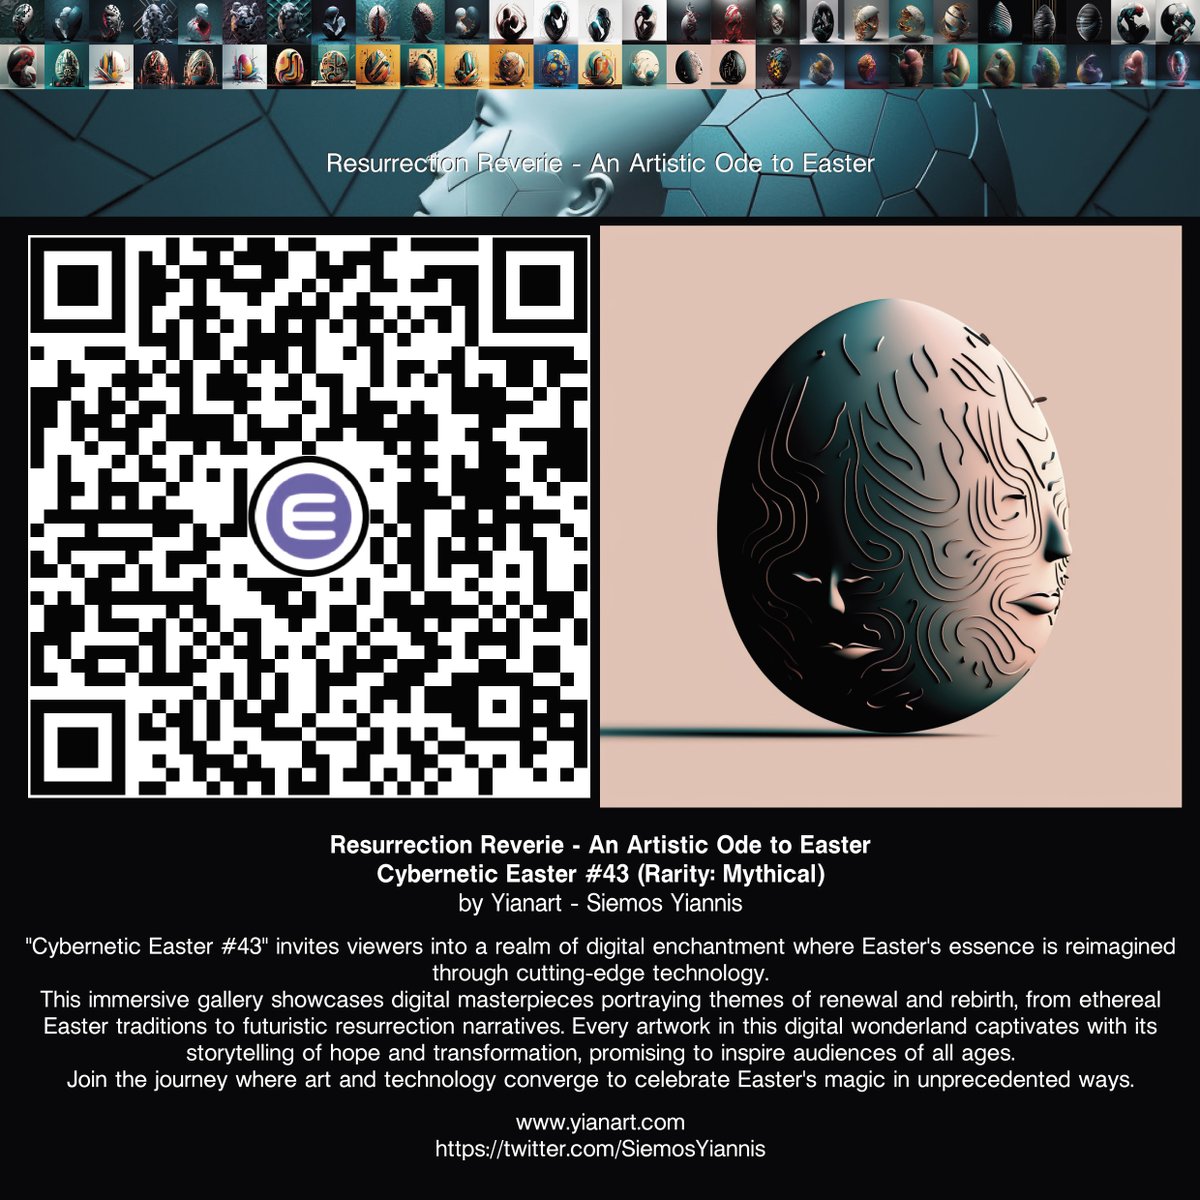 Resurrection Reverie - An Artistic Ode to Easter
Cybernetic Easter #43 (Rarity: Mythical)🥚

Claim Now!
nft.io/beam/claim/5e5…

#nft #nftarts #nftartist #nftartists #nftartwork #nftartcollector #crypto #Cryptocurency #blockchain #digitalart #yianart #enjin #easter #FuelTheEnjin